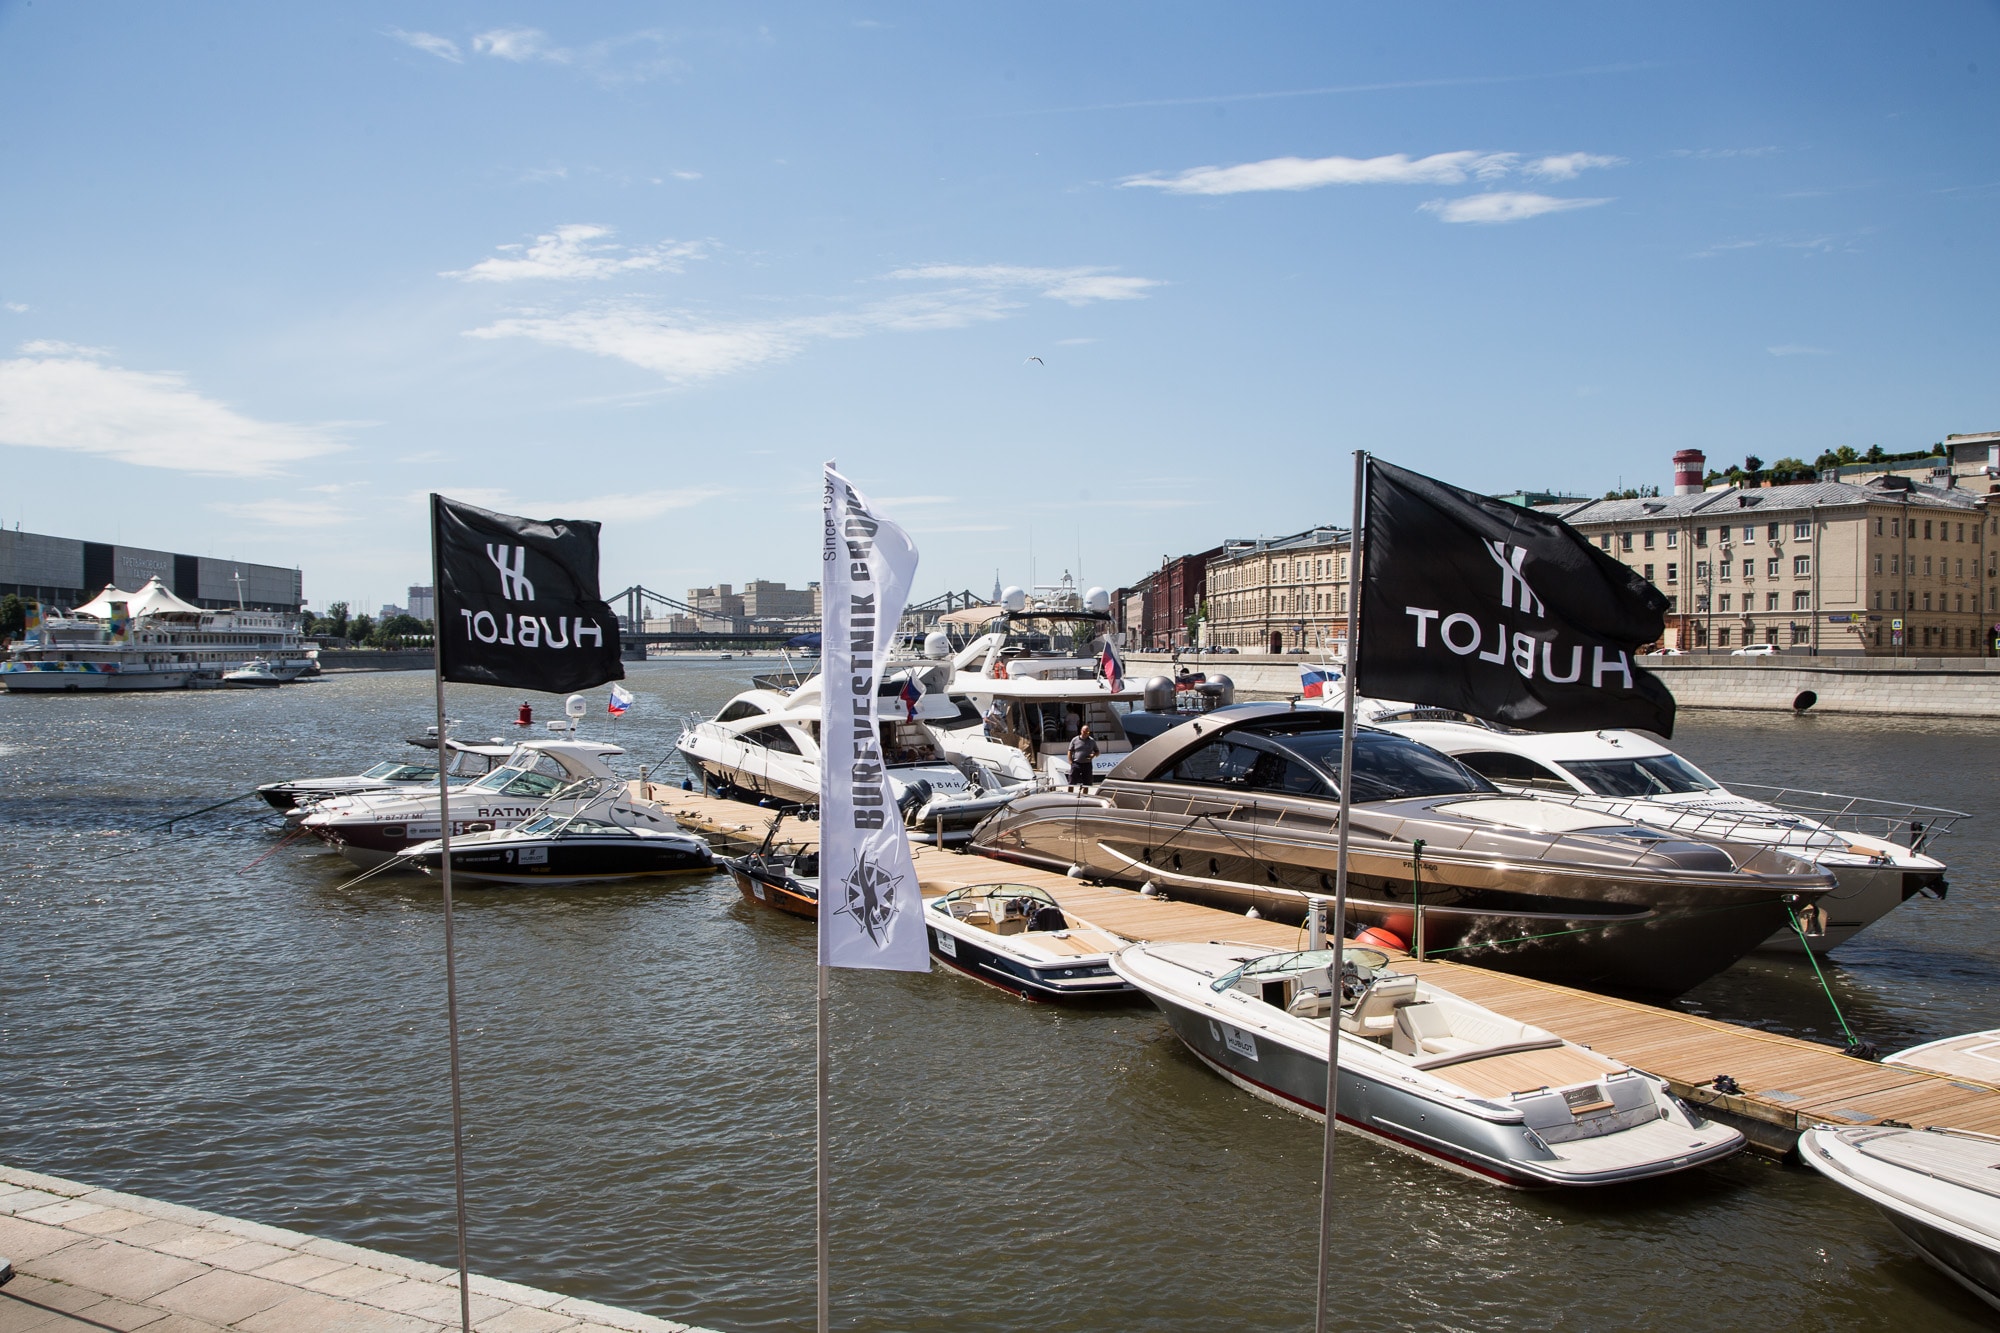 Hublot powerboat 2015 Moscow